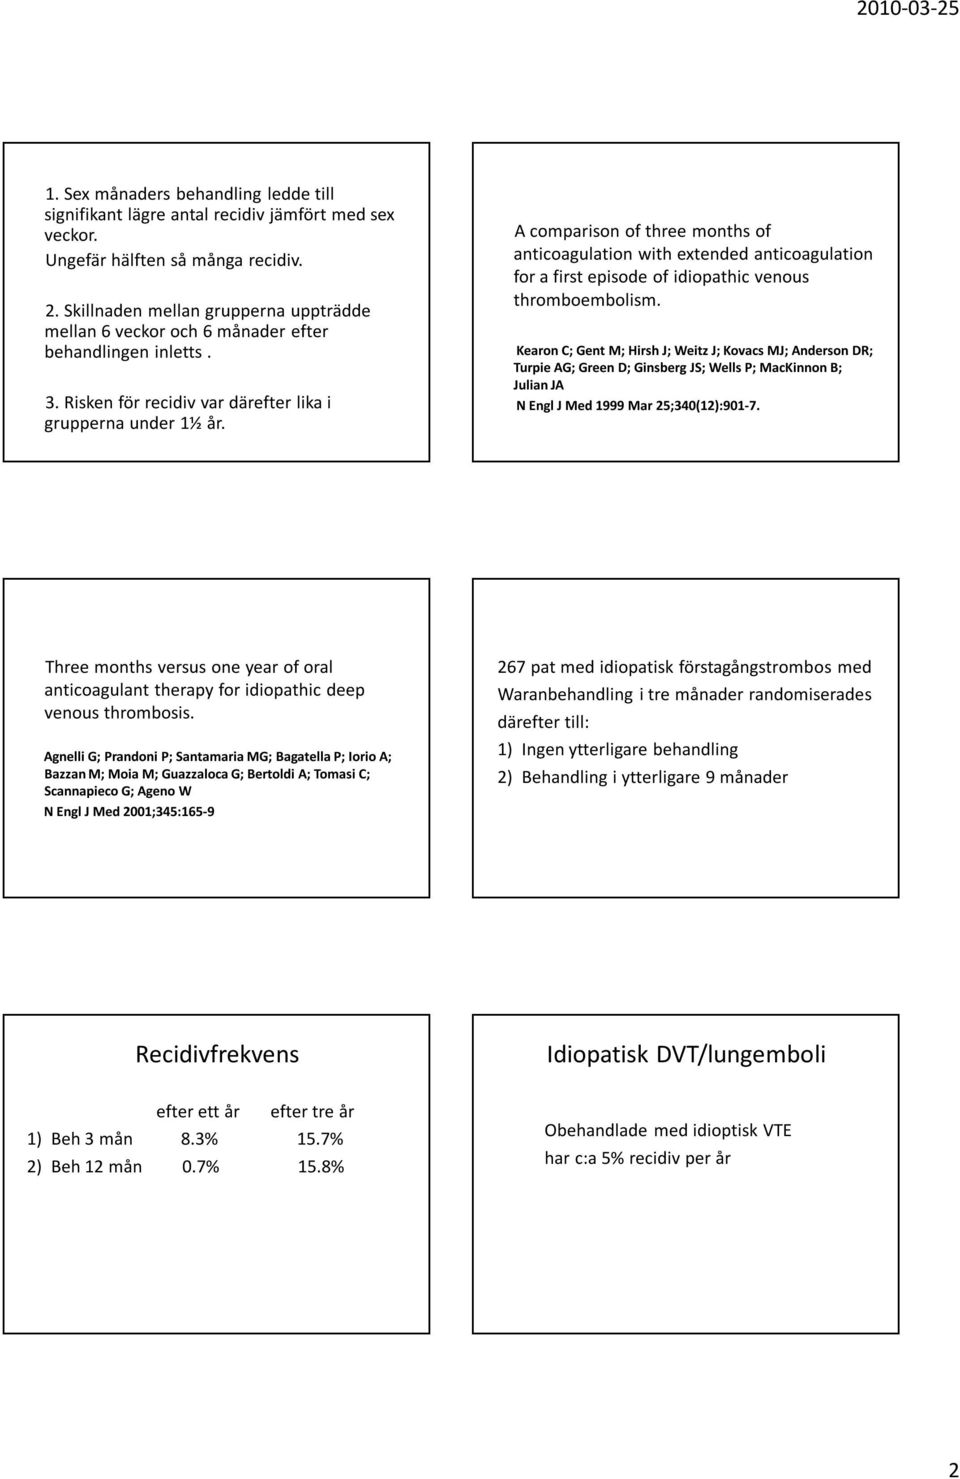 A comparison of three months of anticoagulation with extended anticoagulation for a first episode of idiopathic venous thromboembolism.